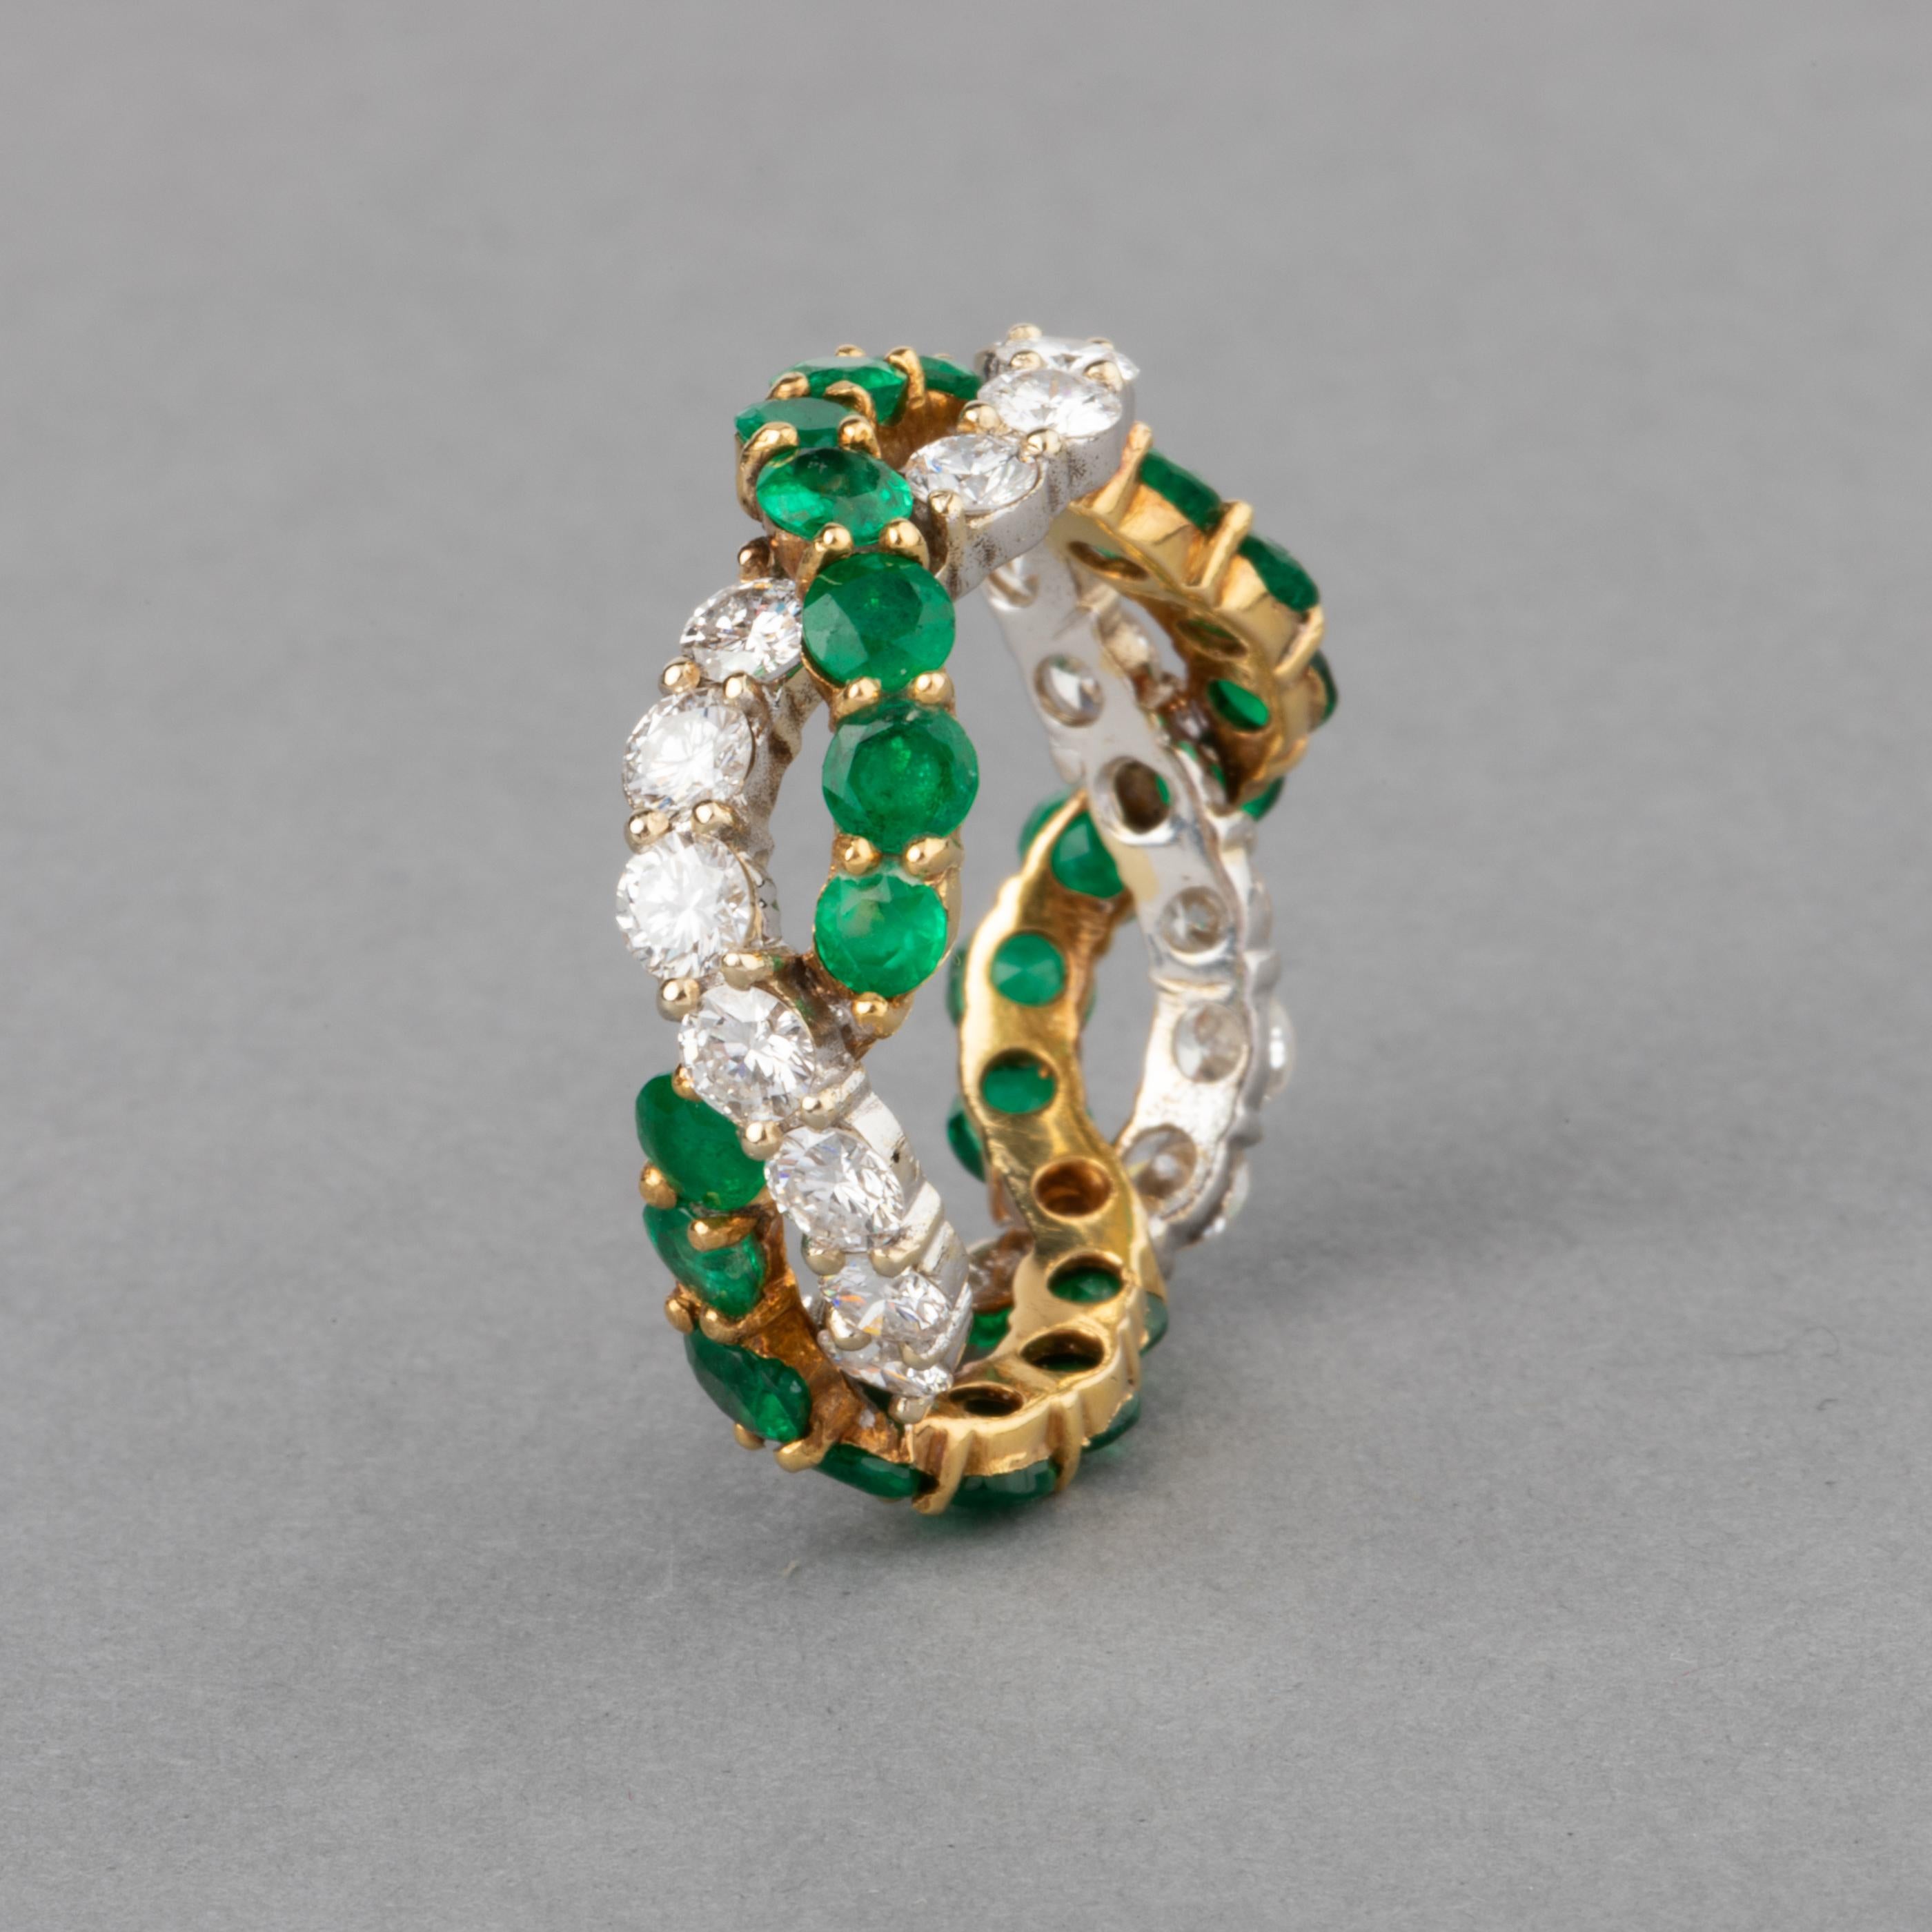 1.80 Carats Diamonds and 2.20 Carats Emeralds French Ring

Very lovely ring, made in yellow and white gold 18k. 
Made in France circa 1970.
The diamonds are good quality, brilliant cut. 1.80 carats estimate.
The emeralds are good quality also.
The